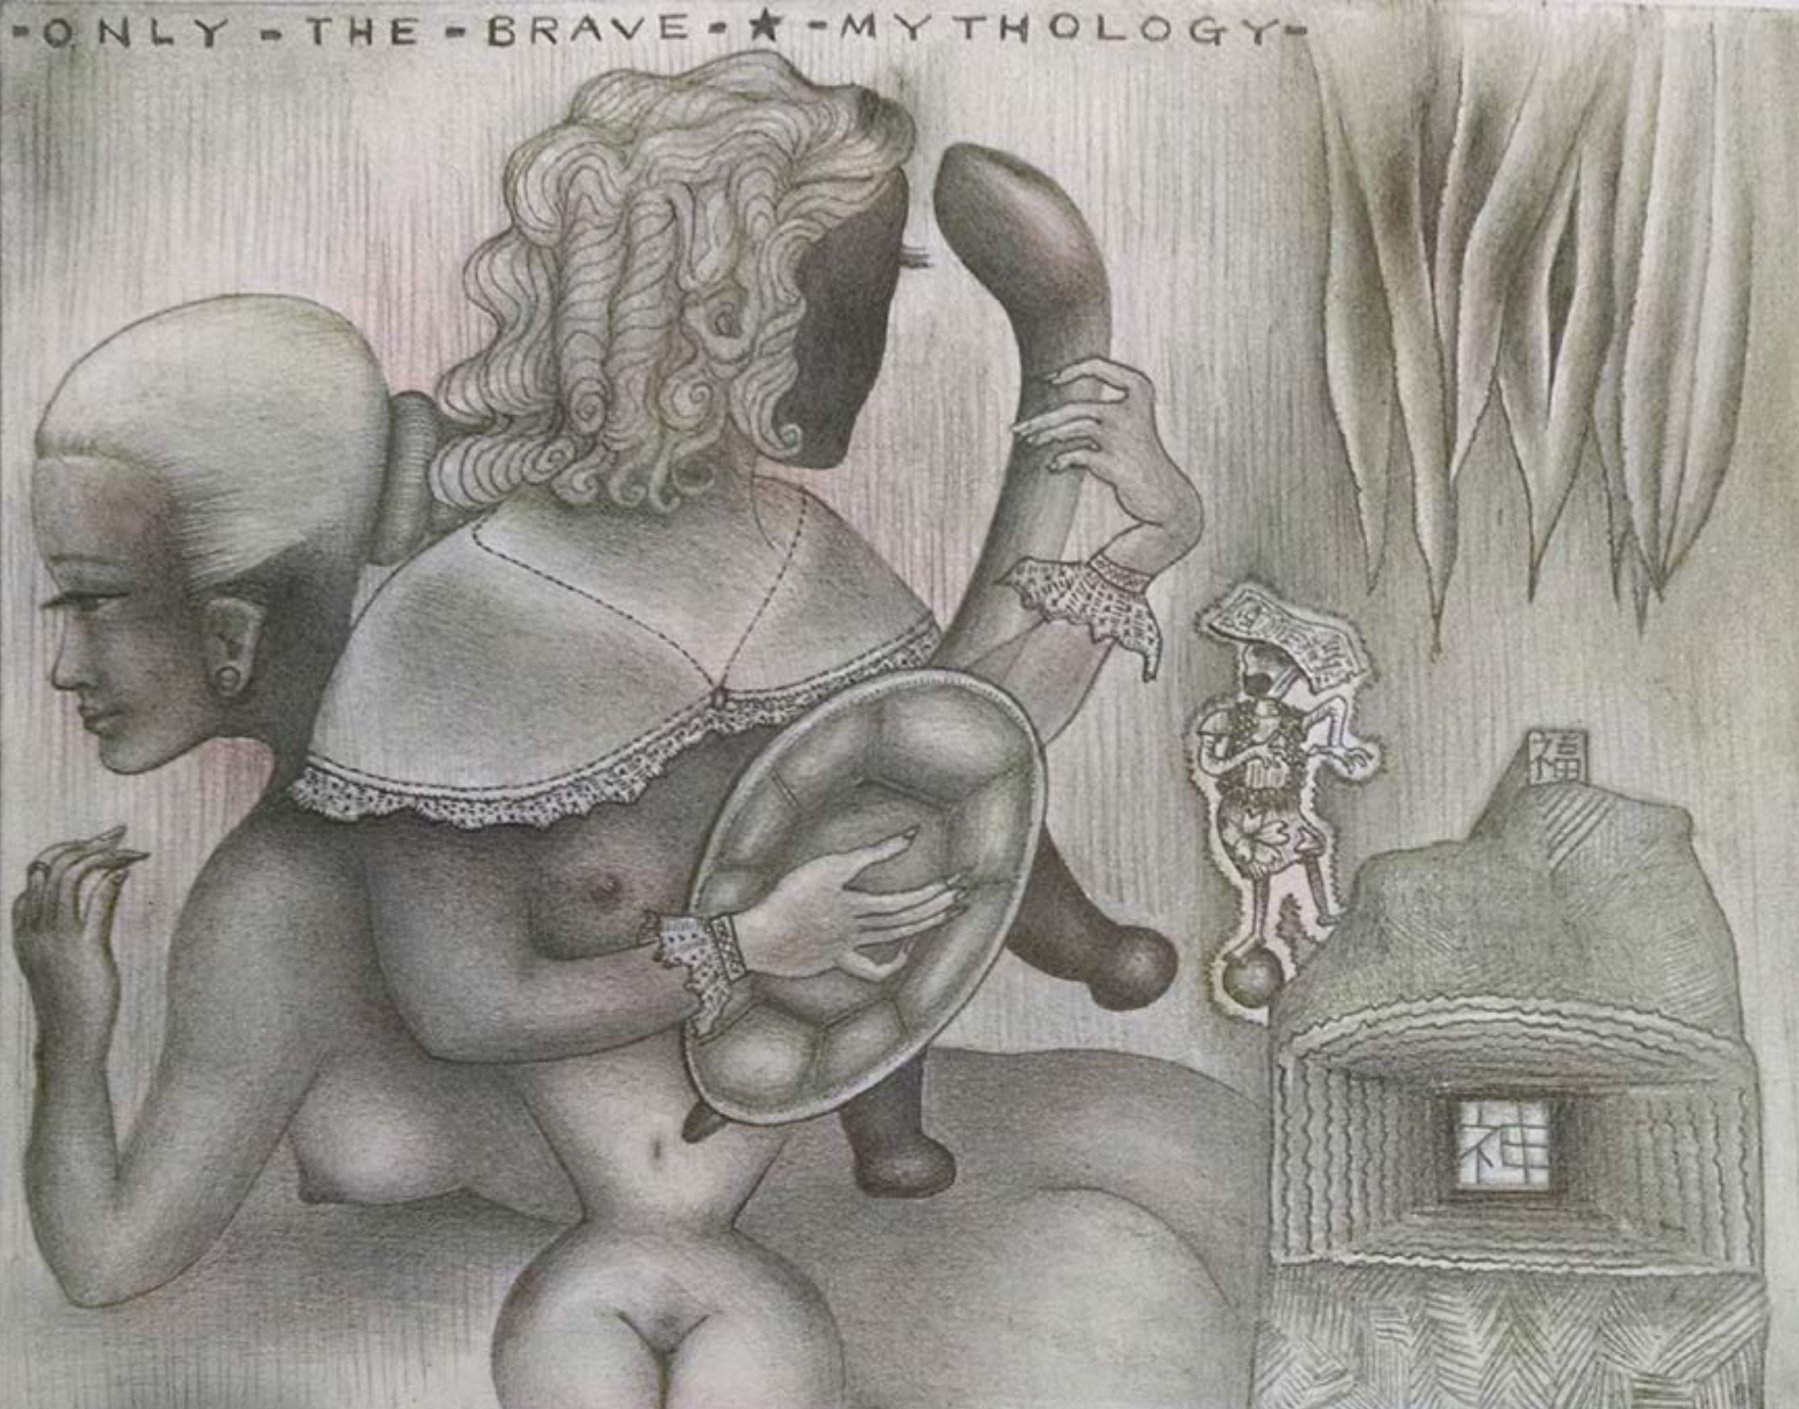  E’wao Kagoshima Only the Brave Mythology, 2009 graphite on paper 11 x 14 inches 